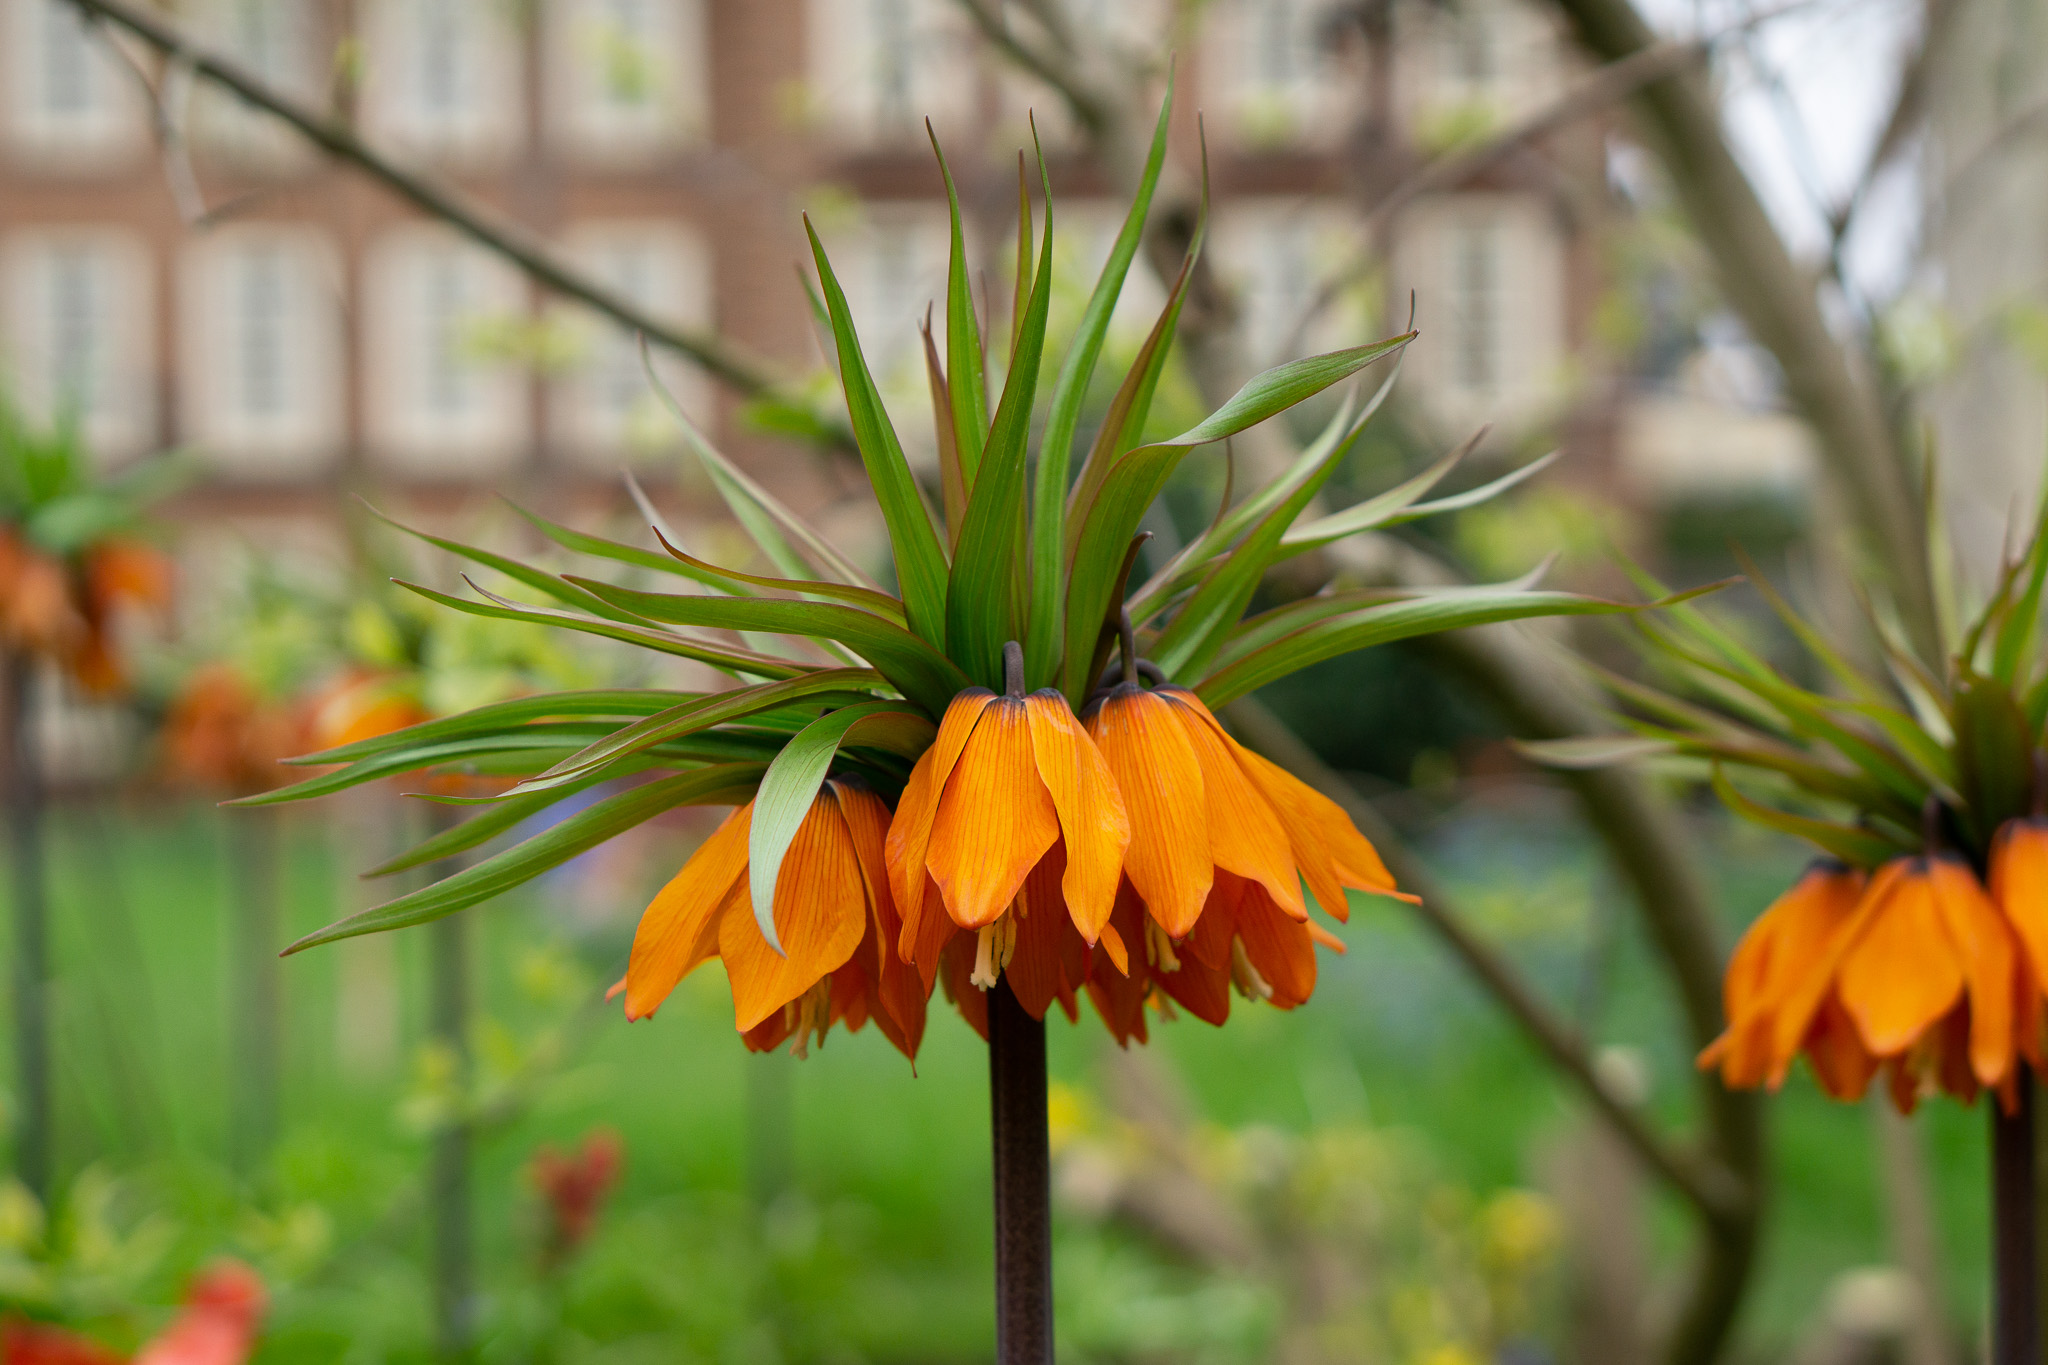 Imperial Fritillaries are in flower by the Chapel. Their blooms face downward to protect the pollen from the weather.